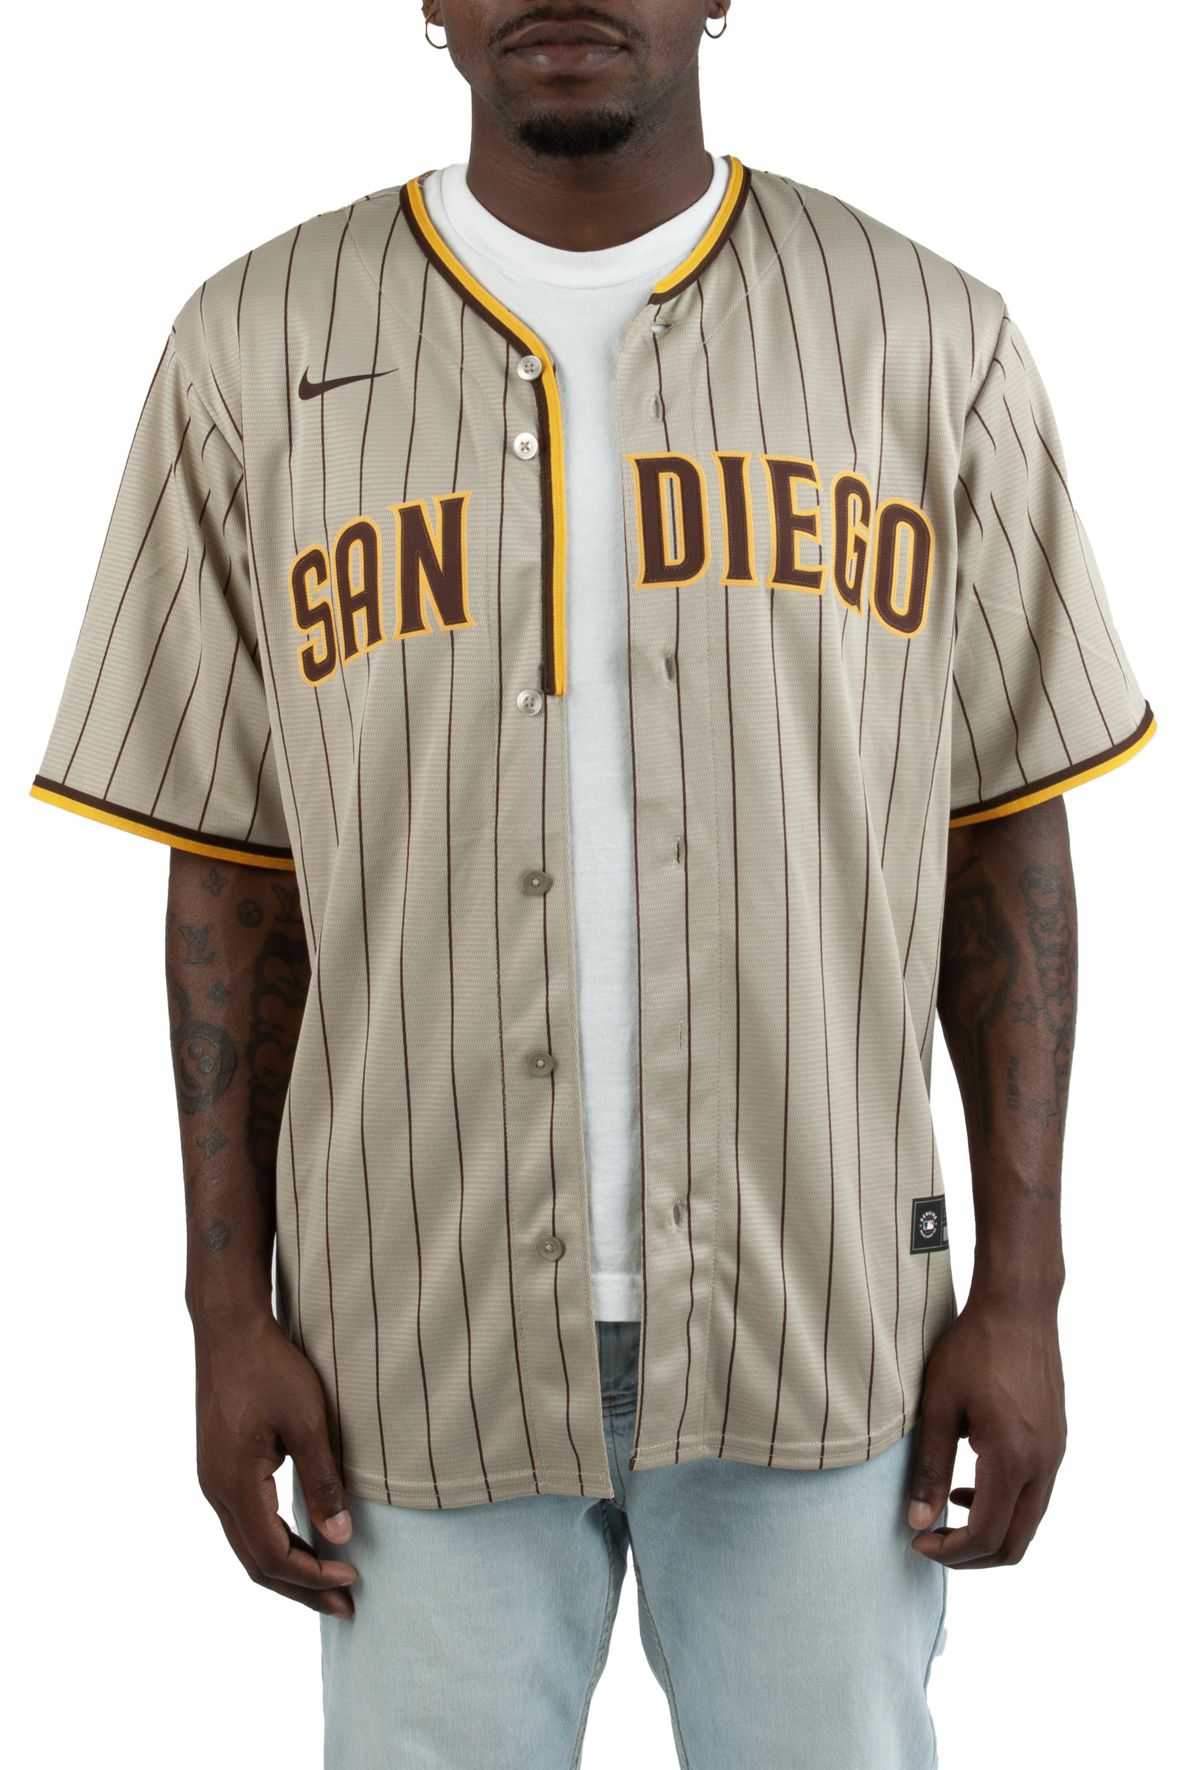 A closer look at the home pinstripes! - San Diego Padres